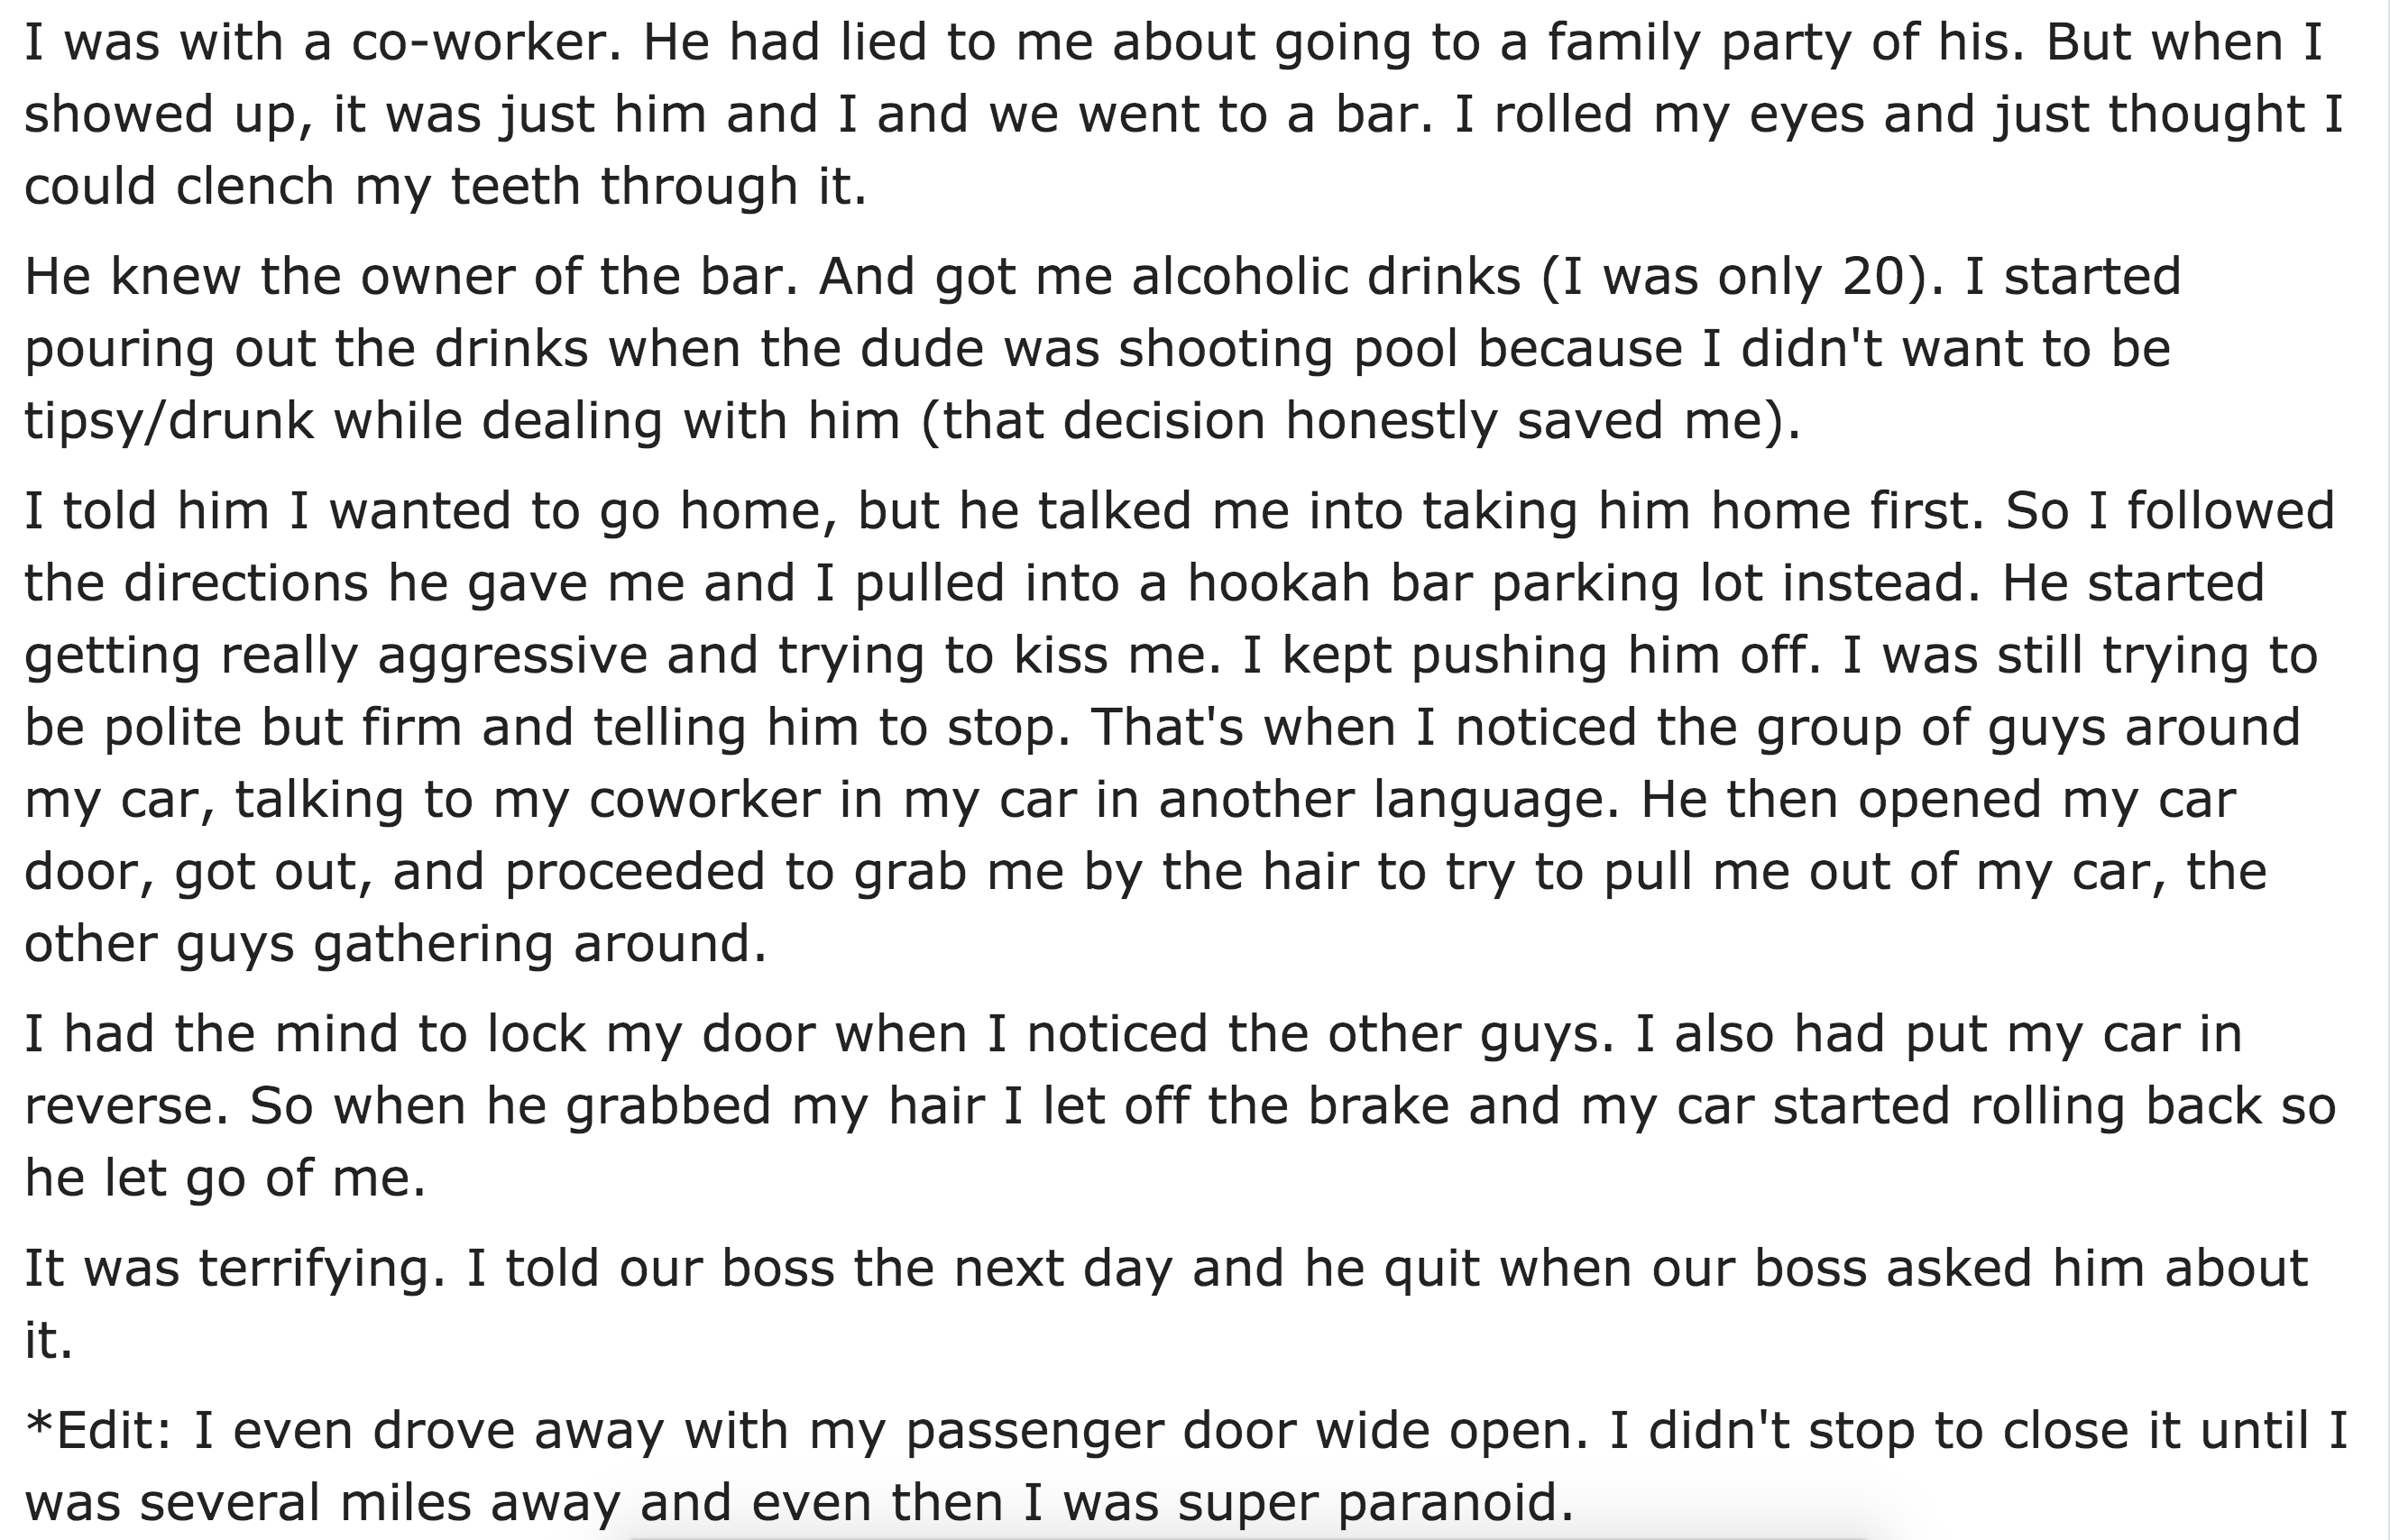 document - I was with a coworker. He had lied to me about going to a family party of his. But when I showed up, it was just him and I and we went to a bar. I rolled my eyes and just thought I could clench my teeth through it. He knew the owner of the bar.